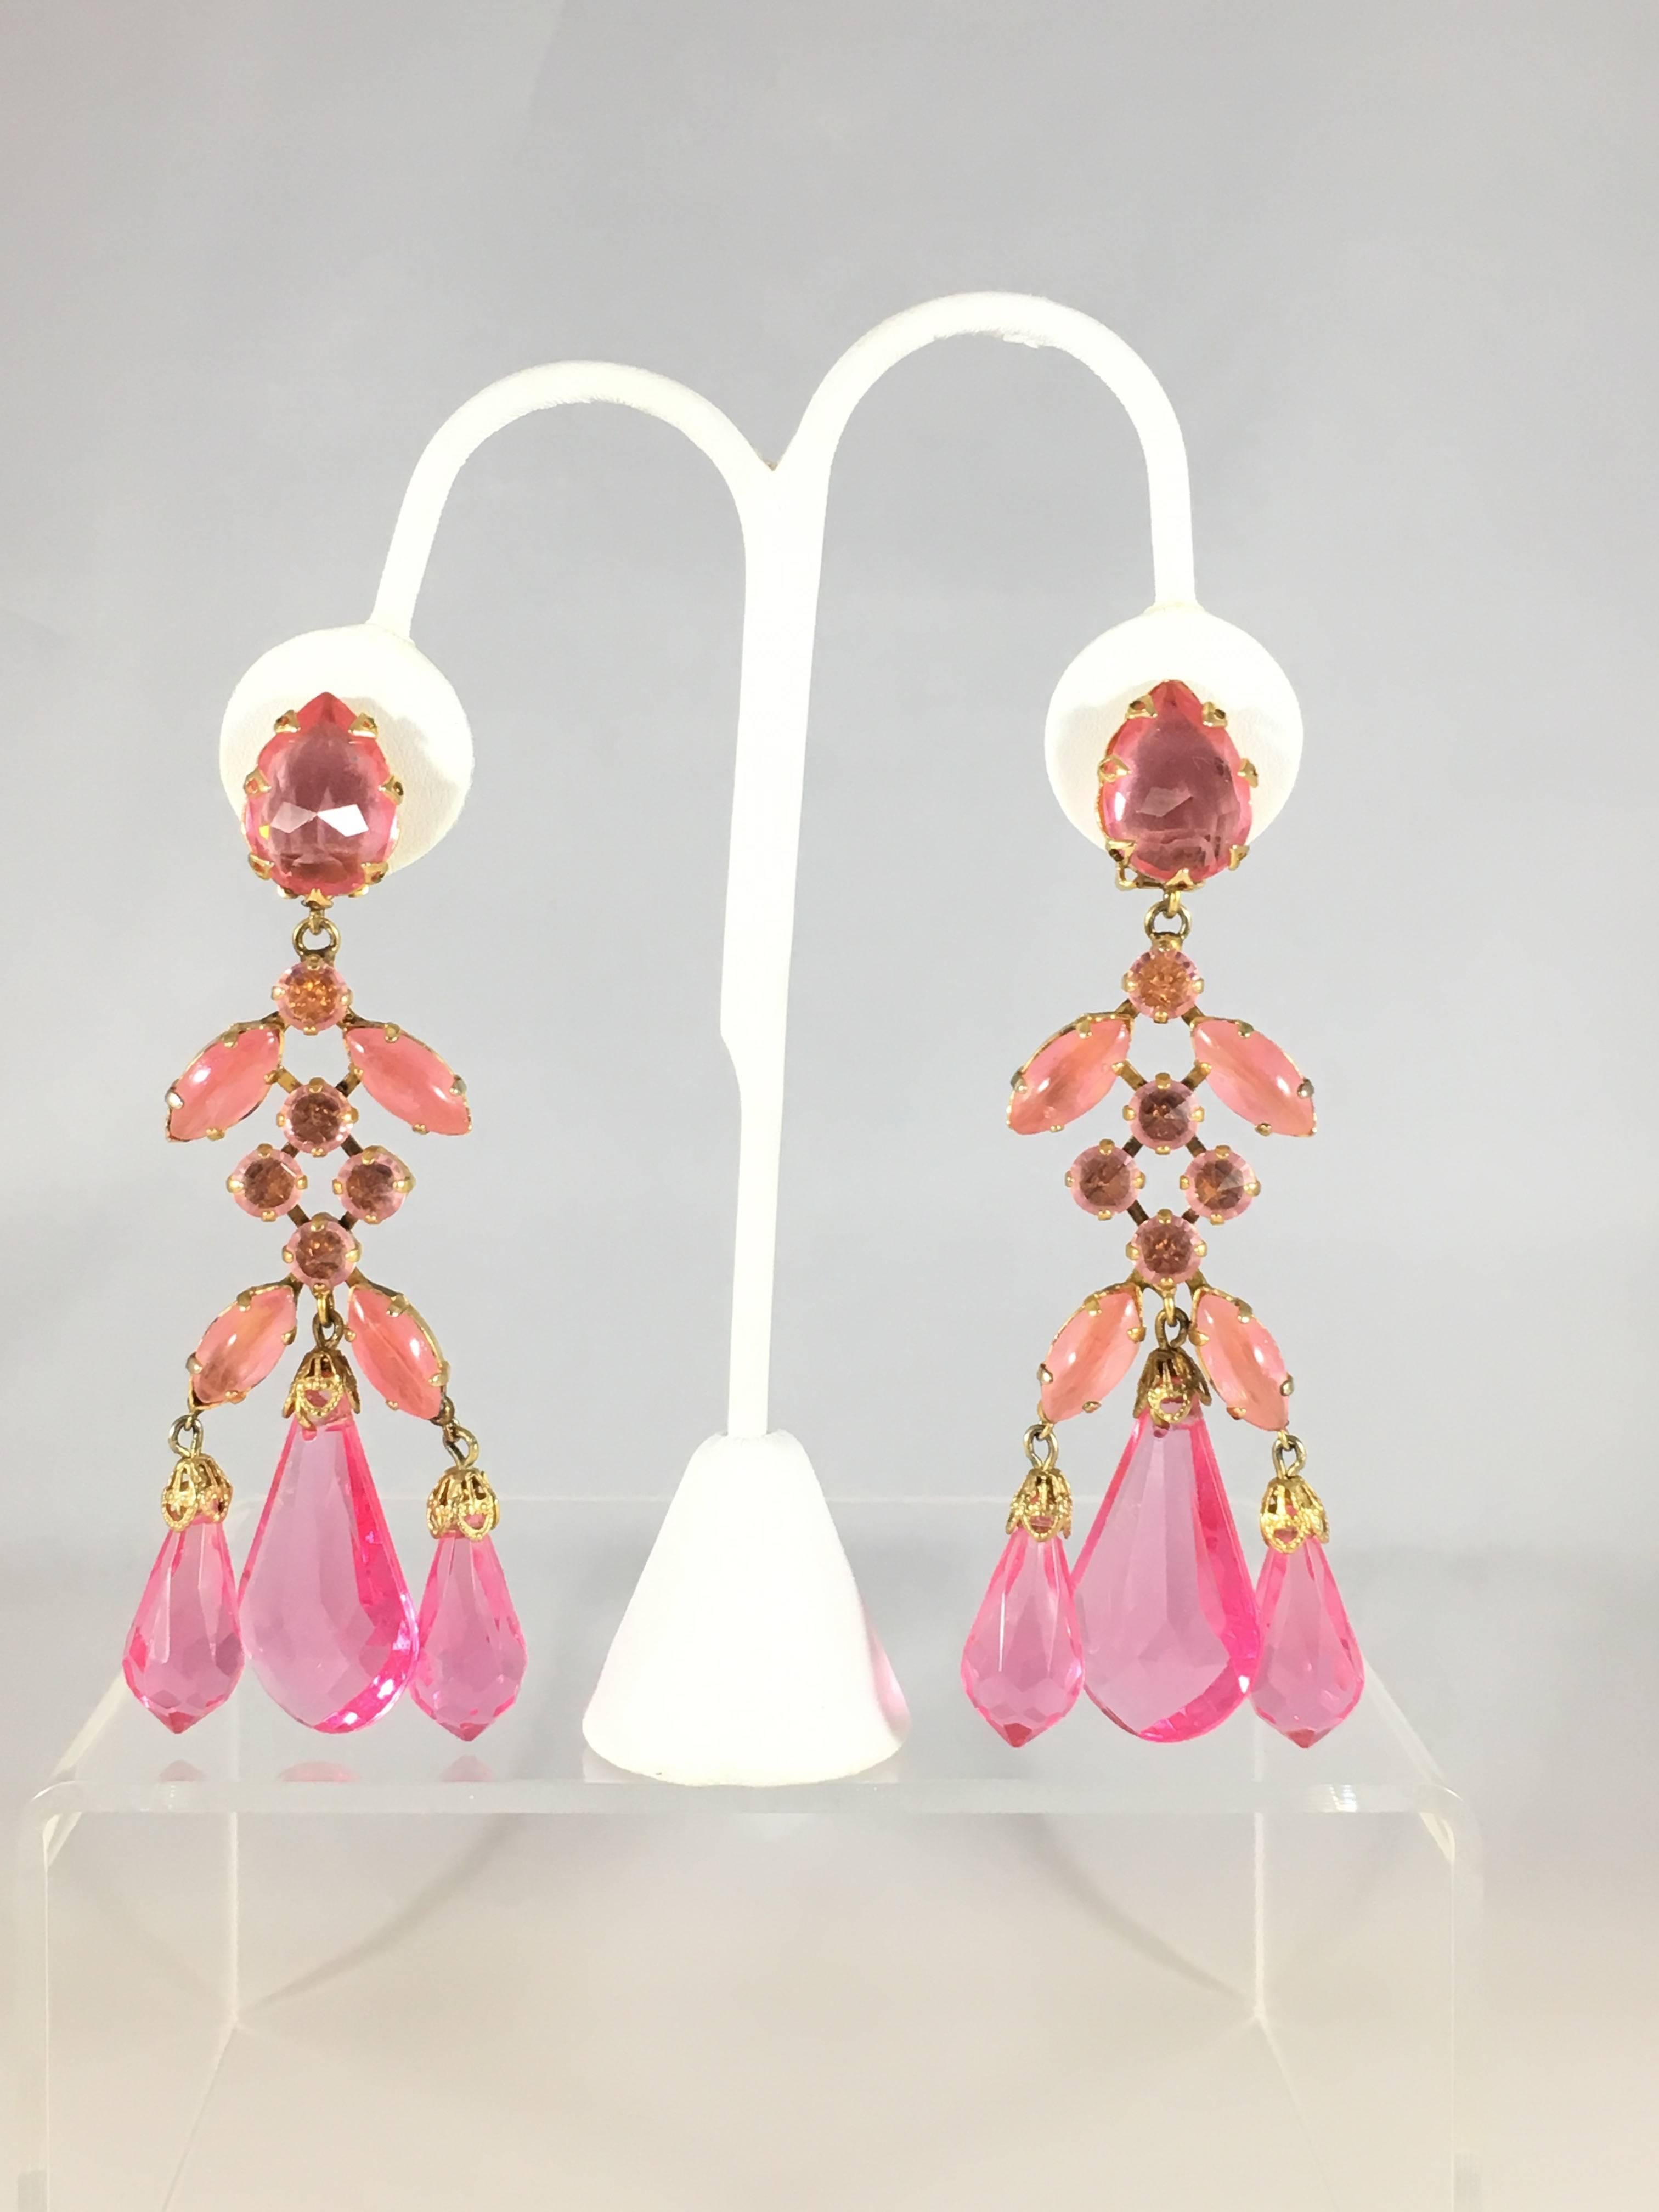 This is an amazing pair of pink show-stopping Schreiner statement chandelier earrings from the 1960s. They are clip-on earrings and they are large - measuring    3 1/4 inches long x 1 3/4 inches wide. The earrings are made out of a gold-toned metal